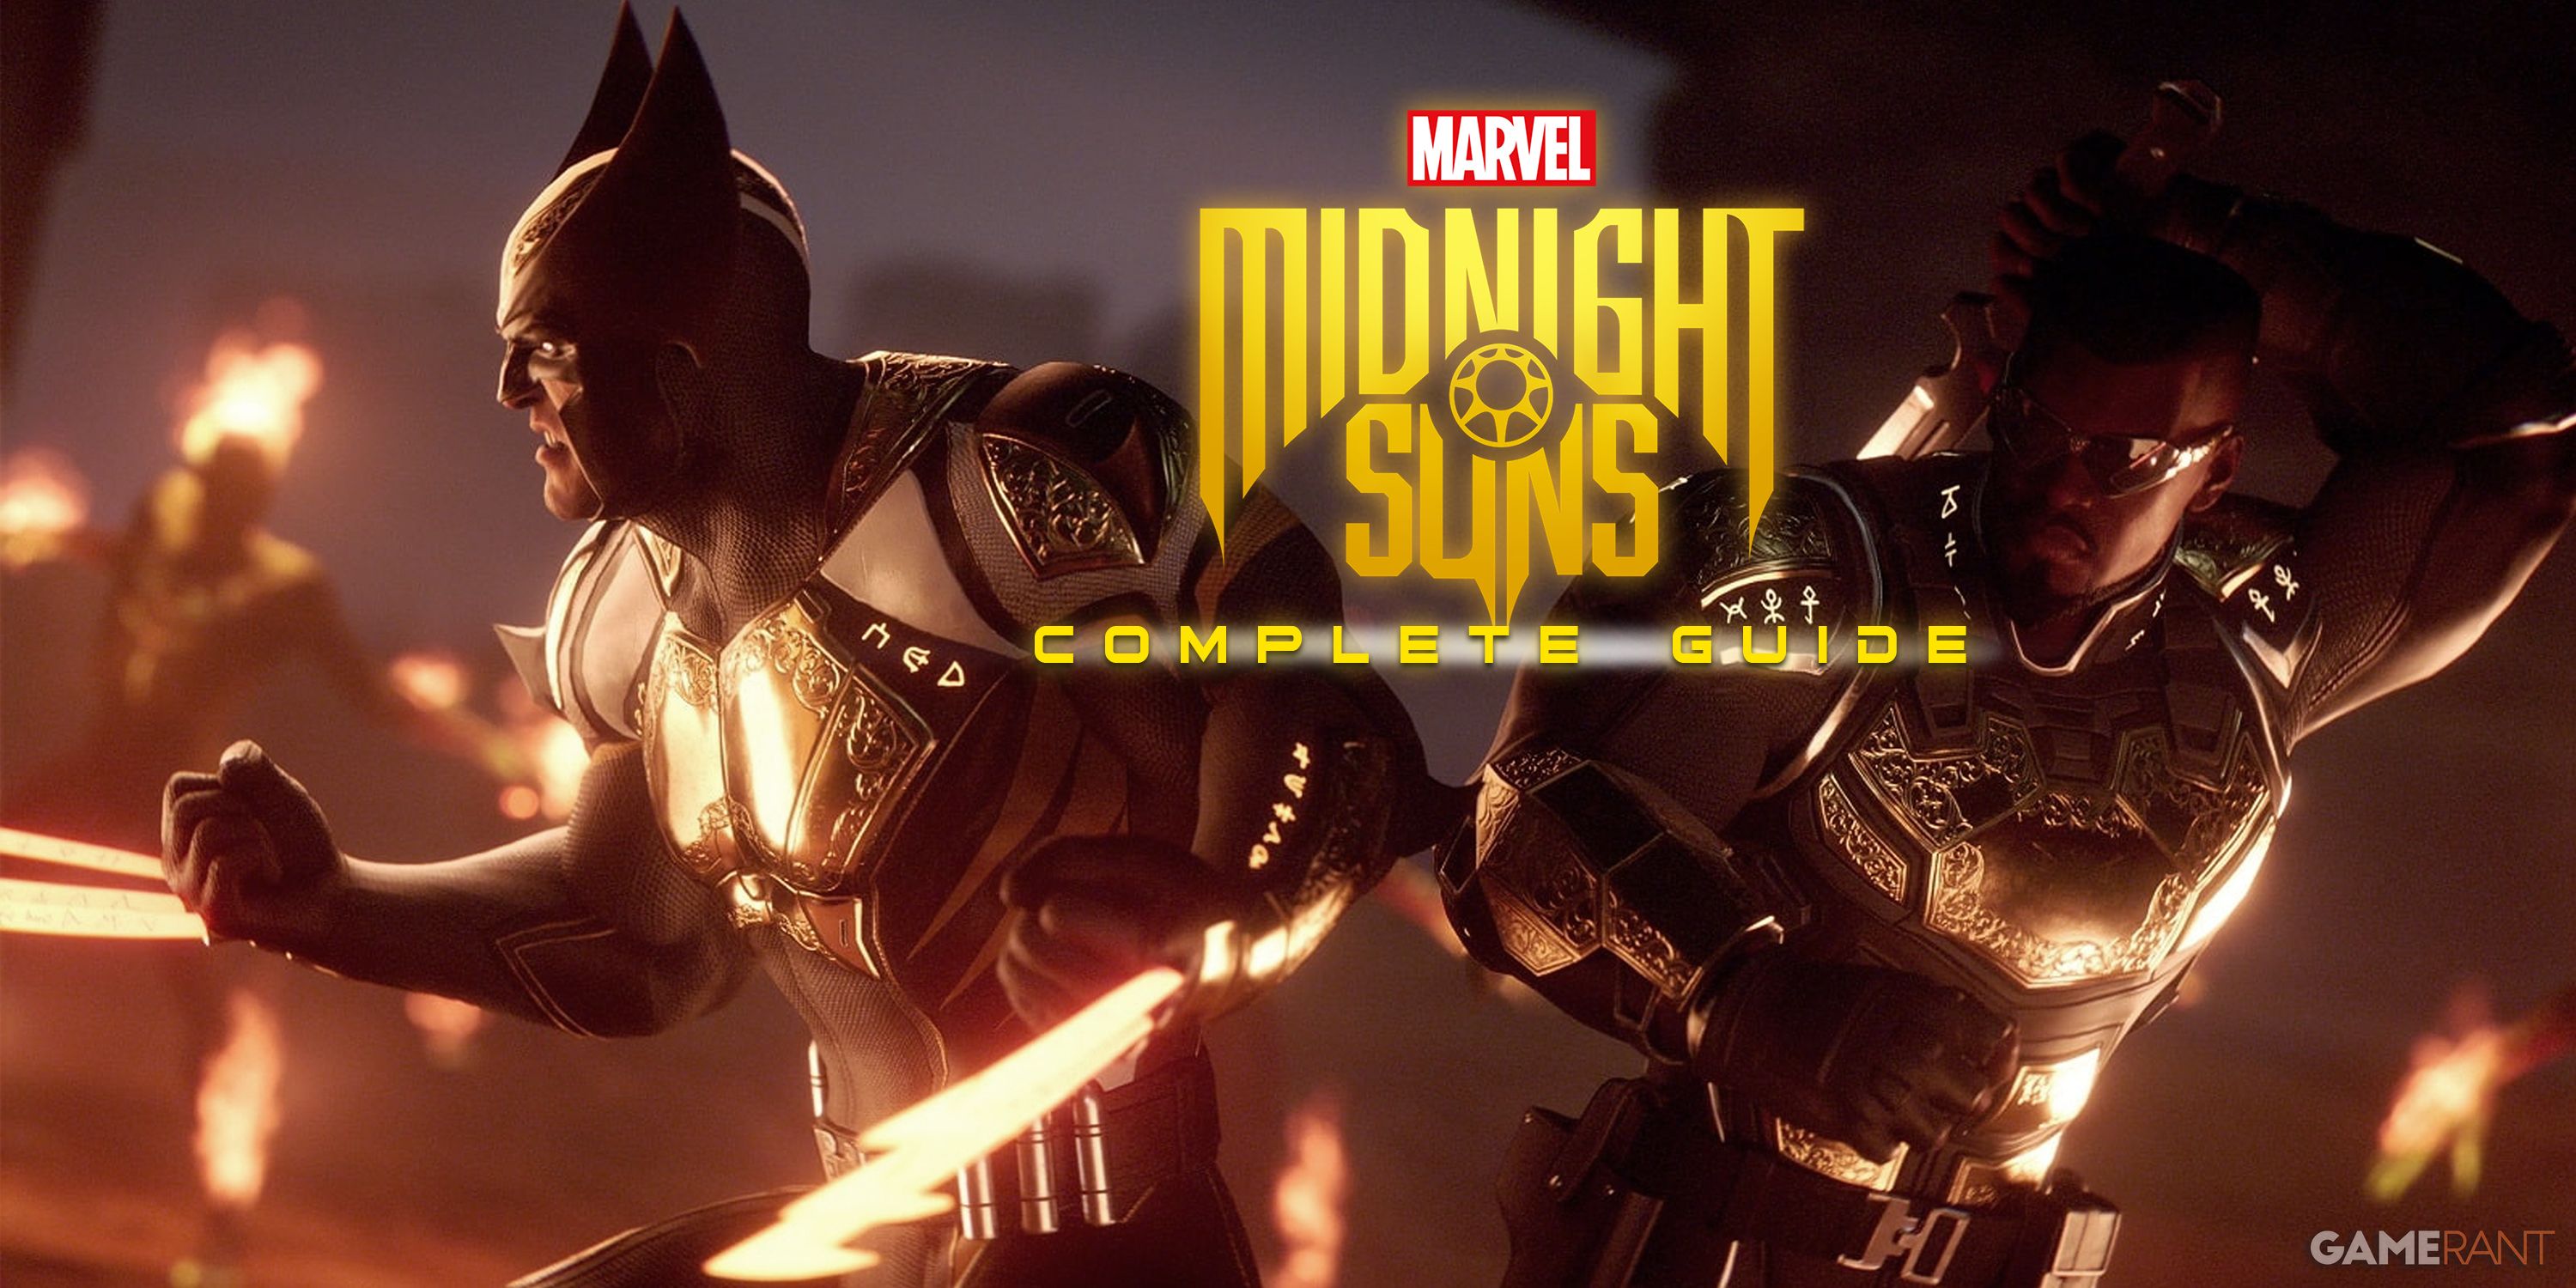 Complete Guide To Marvel's Midnight Suns: Tips, Collectibles, Cards, And More